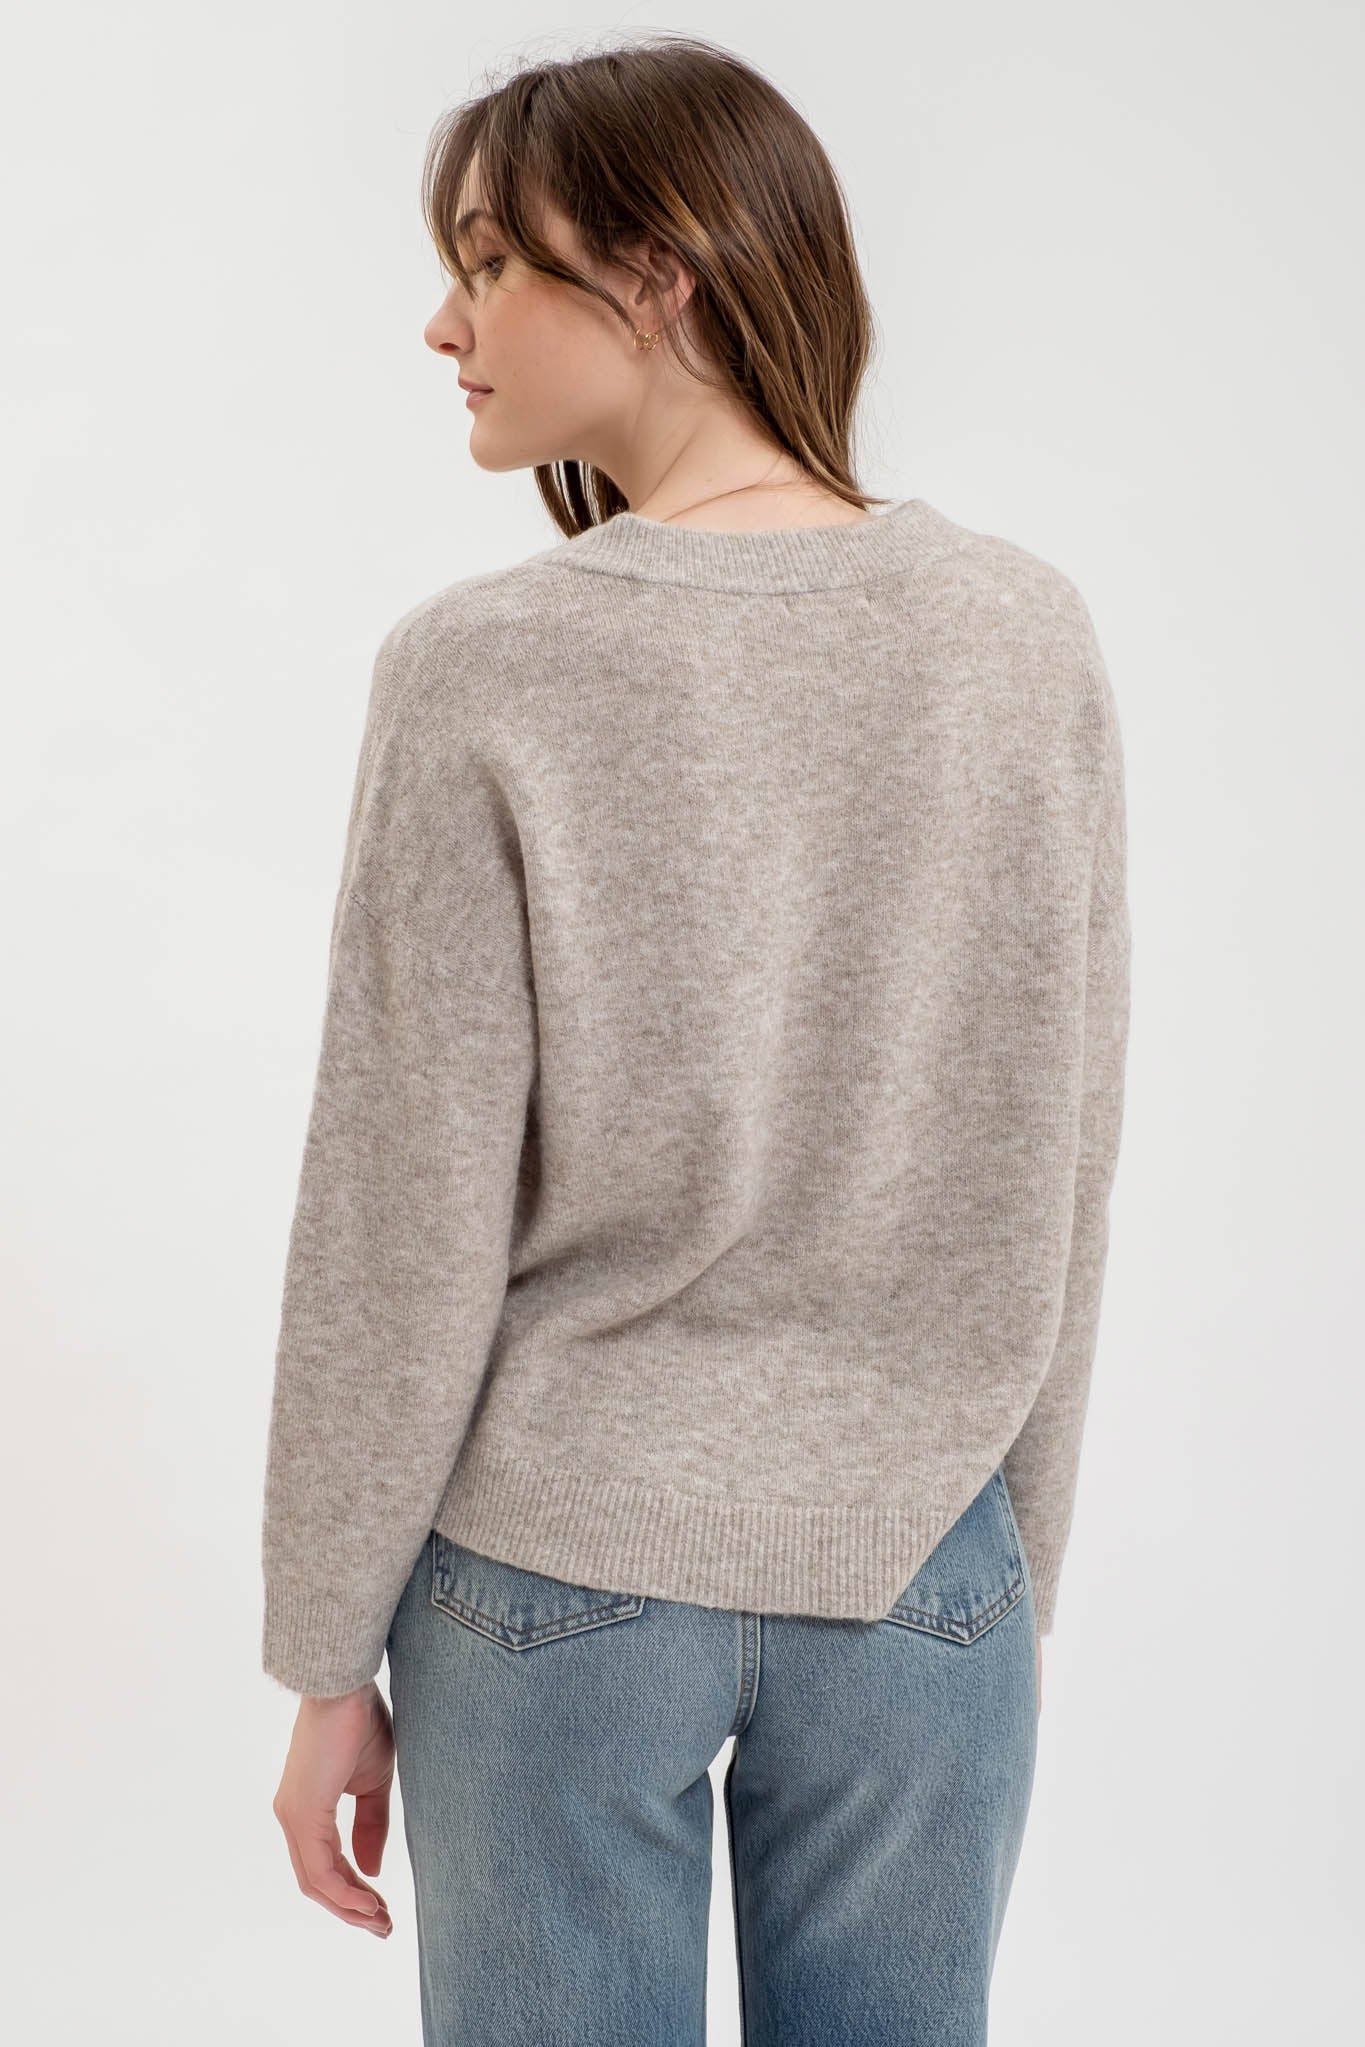 V NECK LONG SLEEVE MARLE KNIT PULLOVER SWEATER